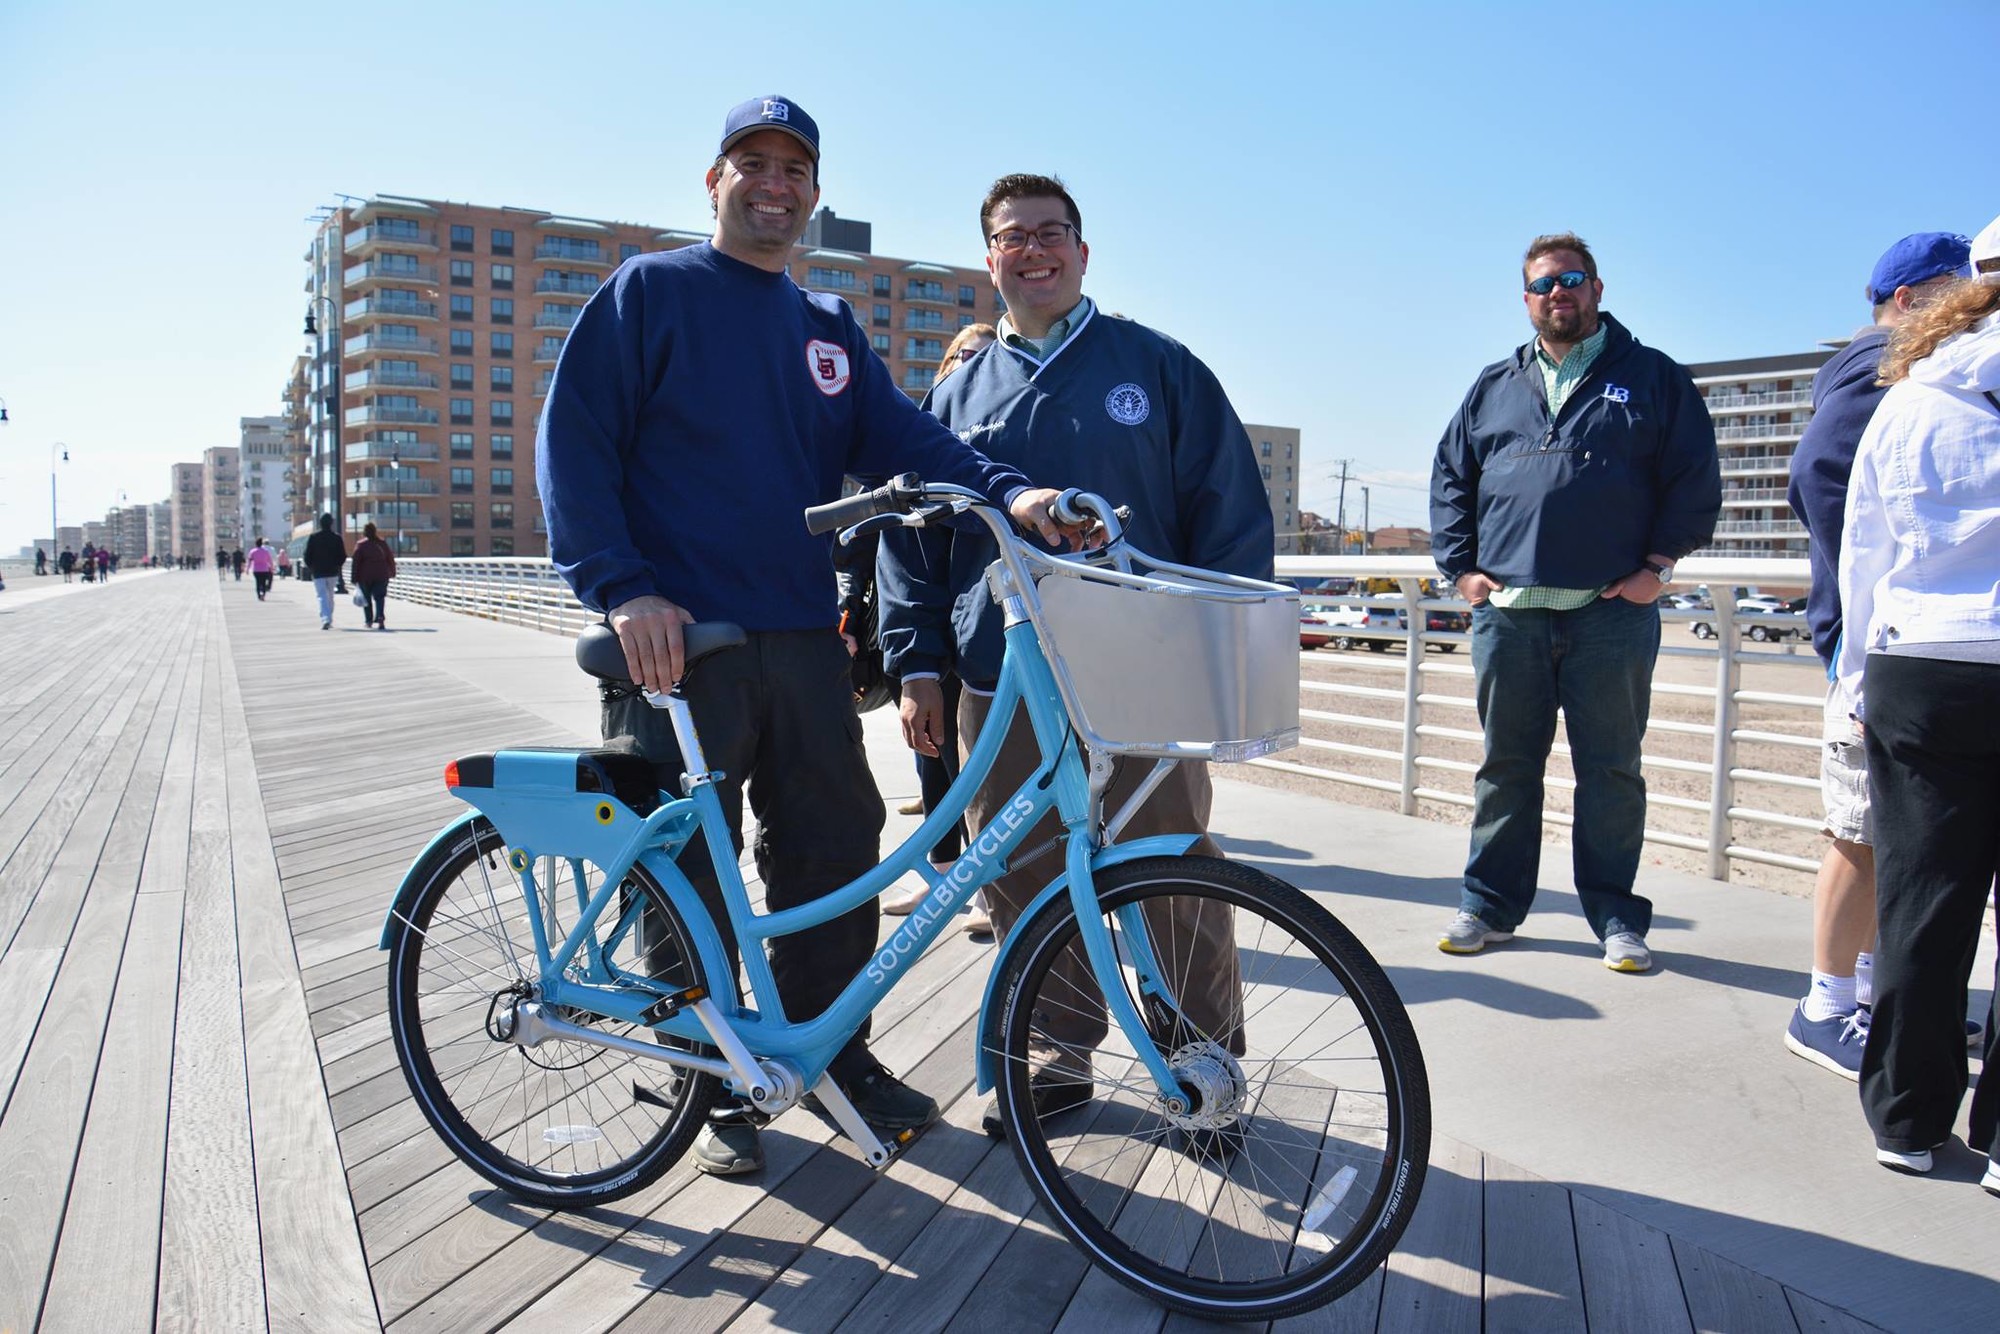 Councilman Anthony Eramo, left, and City Manager Jack Schnirman took one of the new Social Bicycles for a spin last Saturday, part of a new bike-sharing program in the city that launched this month.